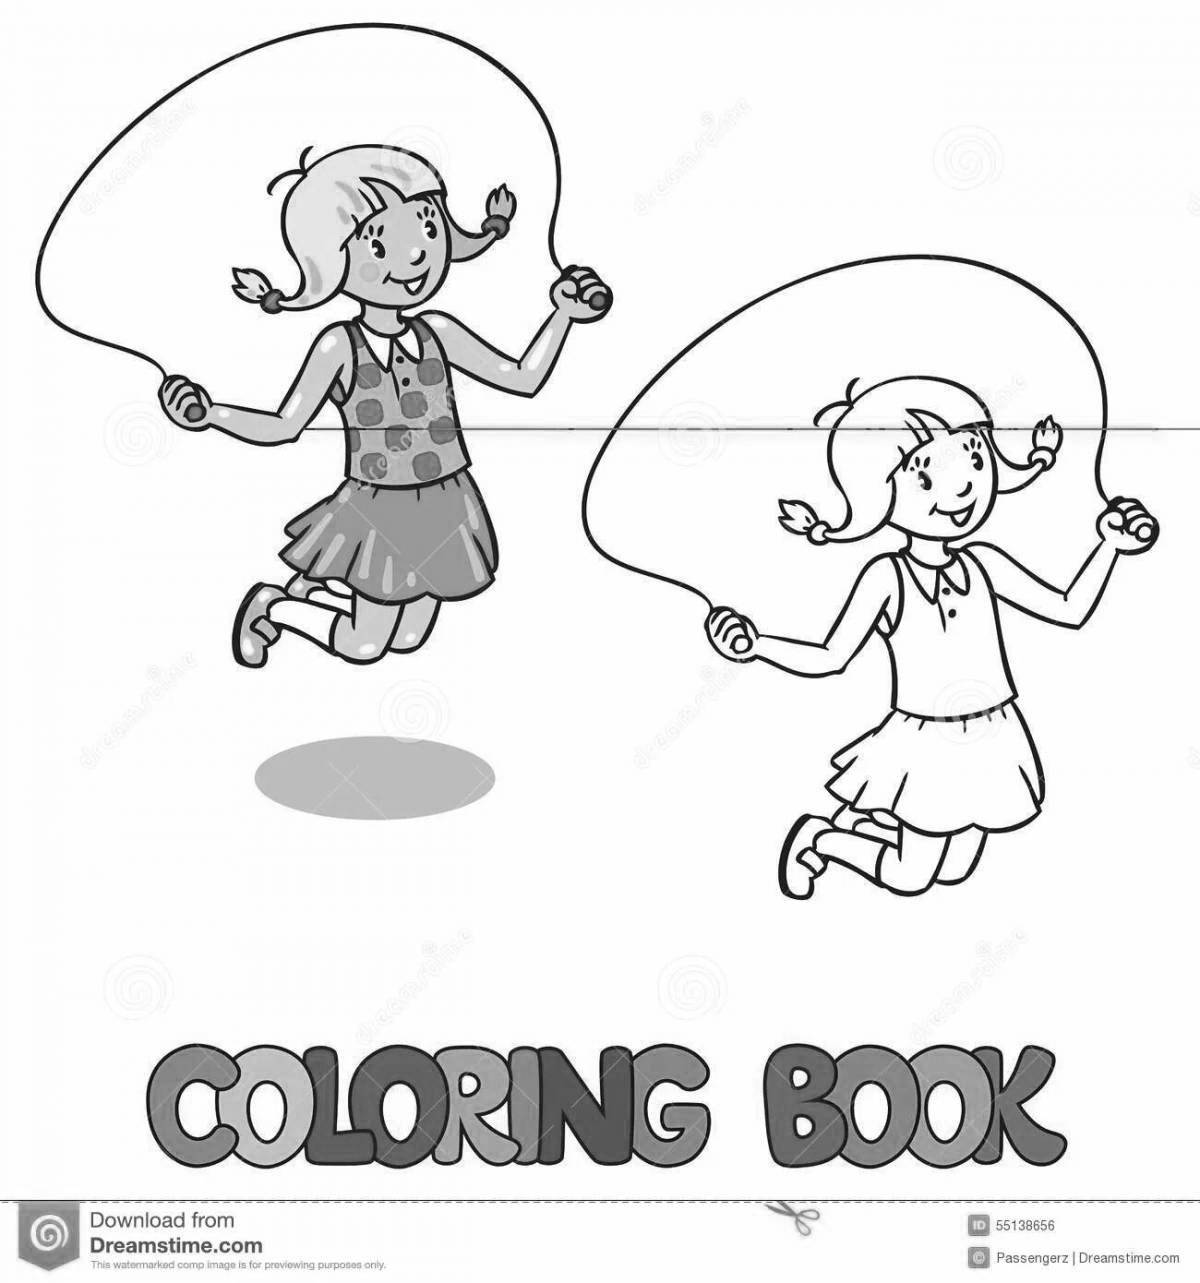 Amazing barto rope coloring page